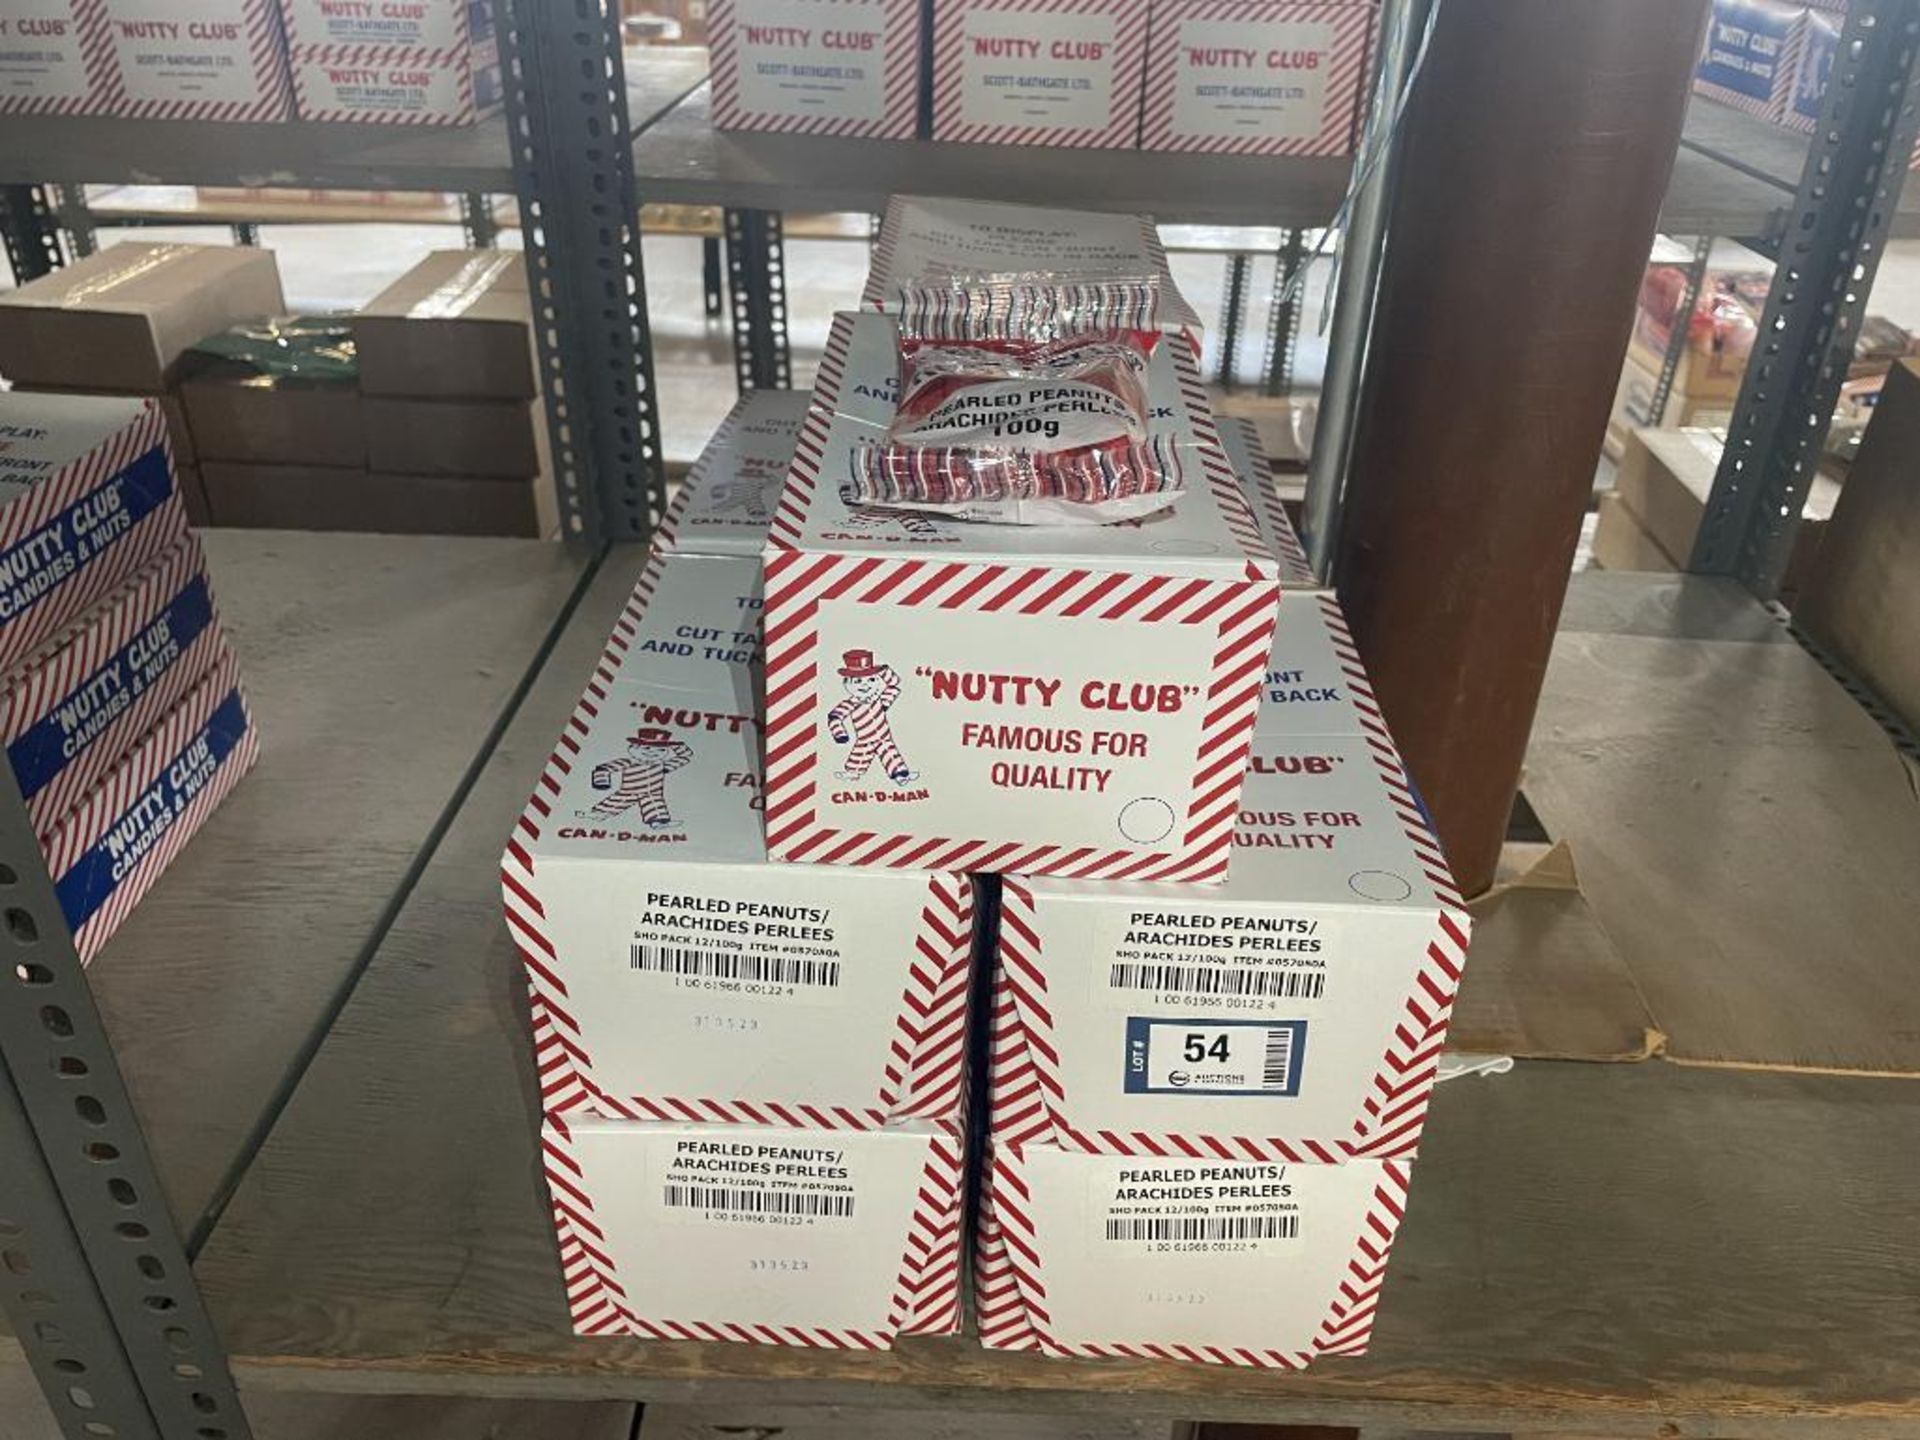 (10) BOXES OF NUTTY CLUB PEARLED PEANUTS, 12/100G PER BOX